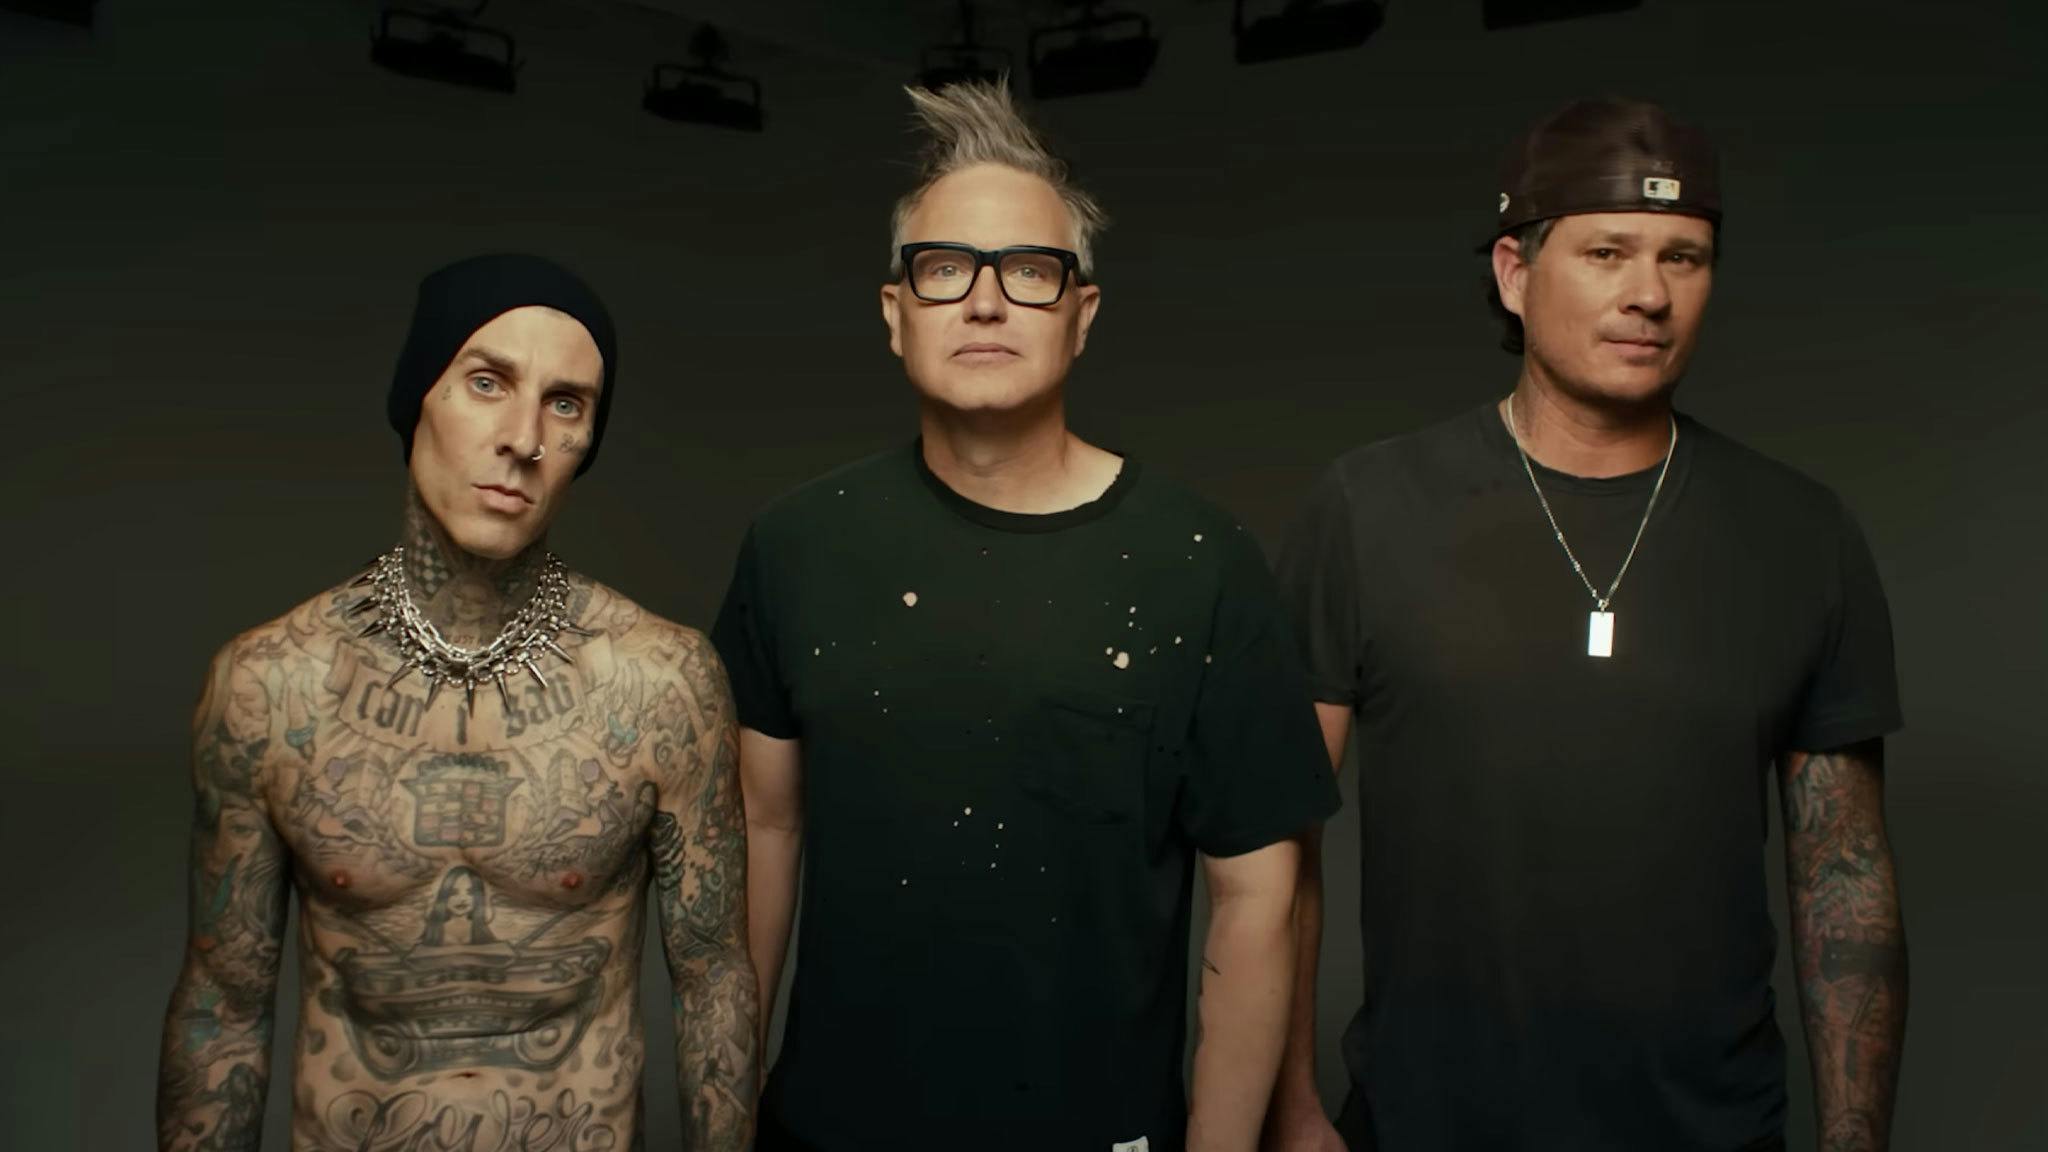 Mark Hoppus says new single ONE MORE TIME is in blink-182’s Mount Rushmore of songs